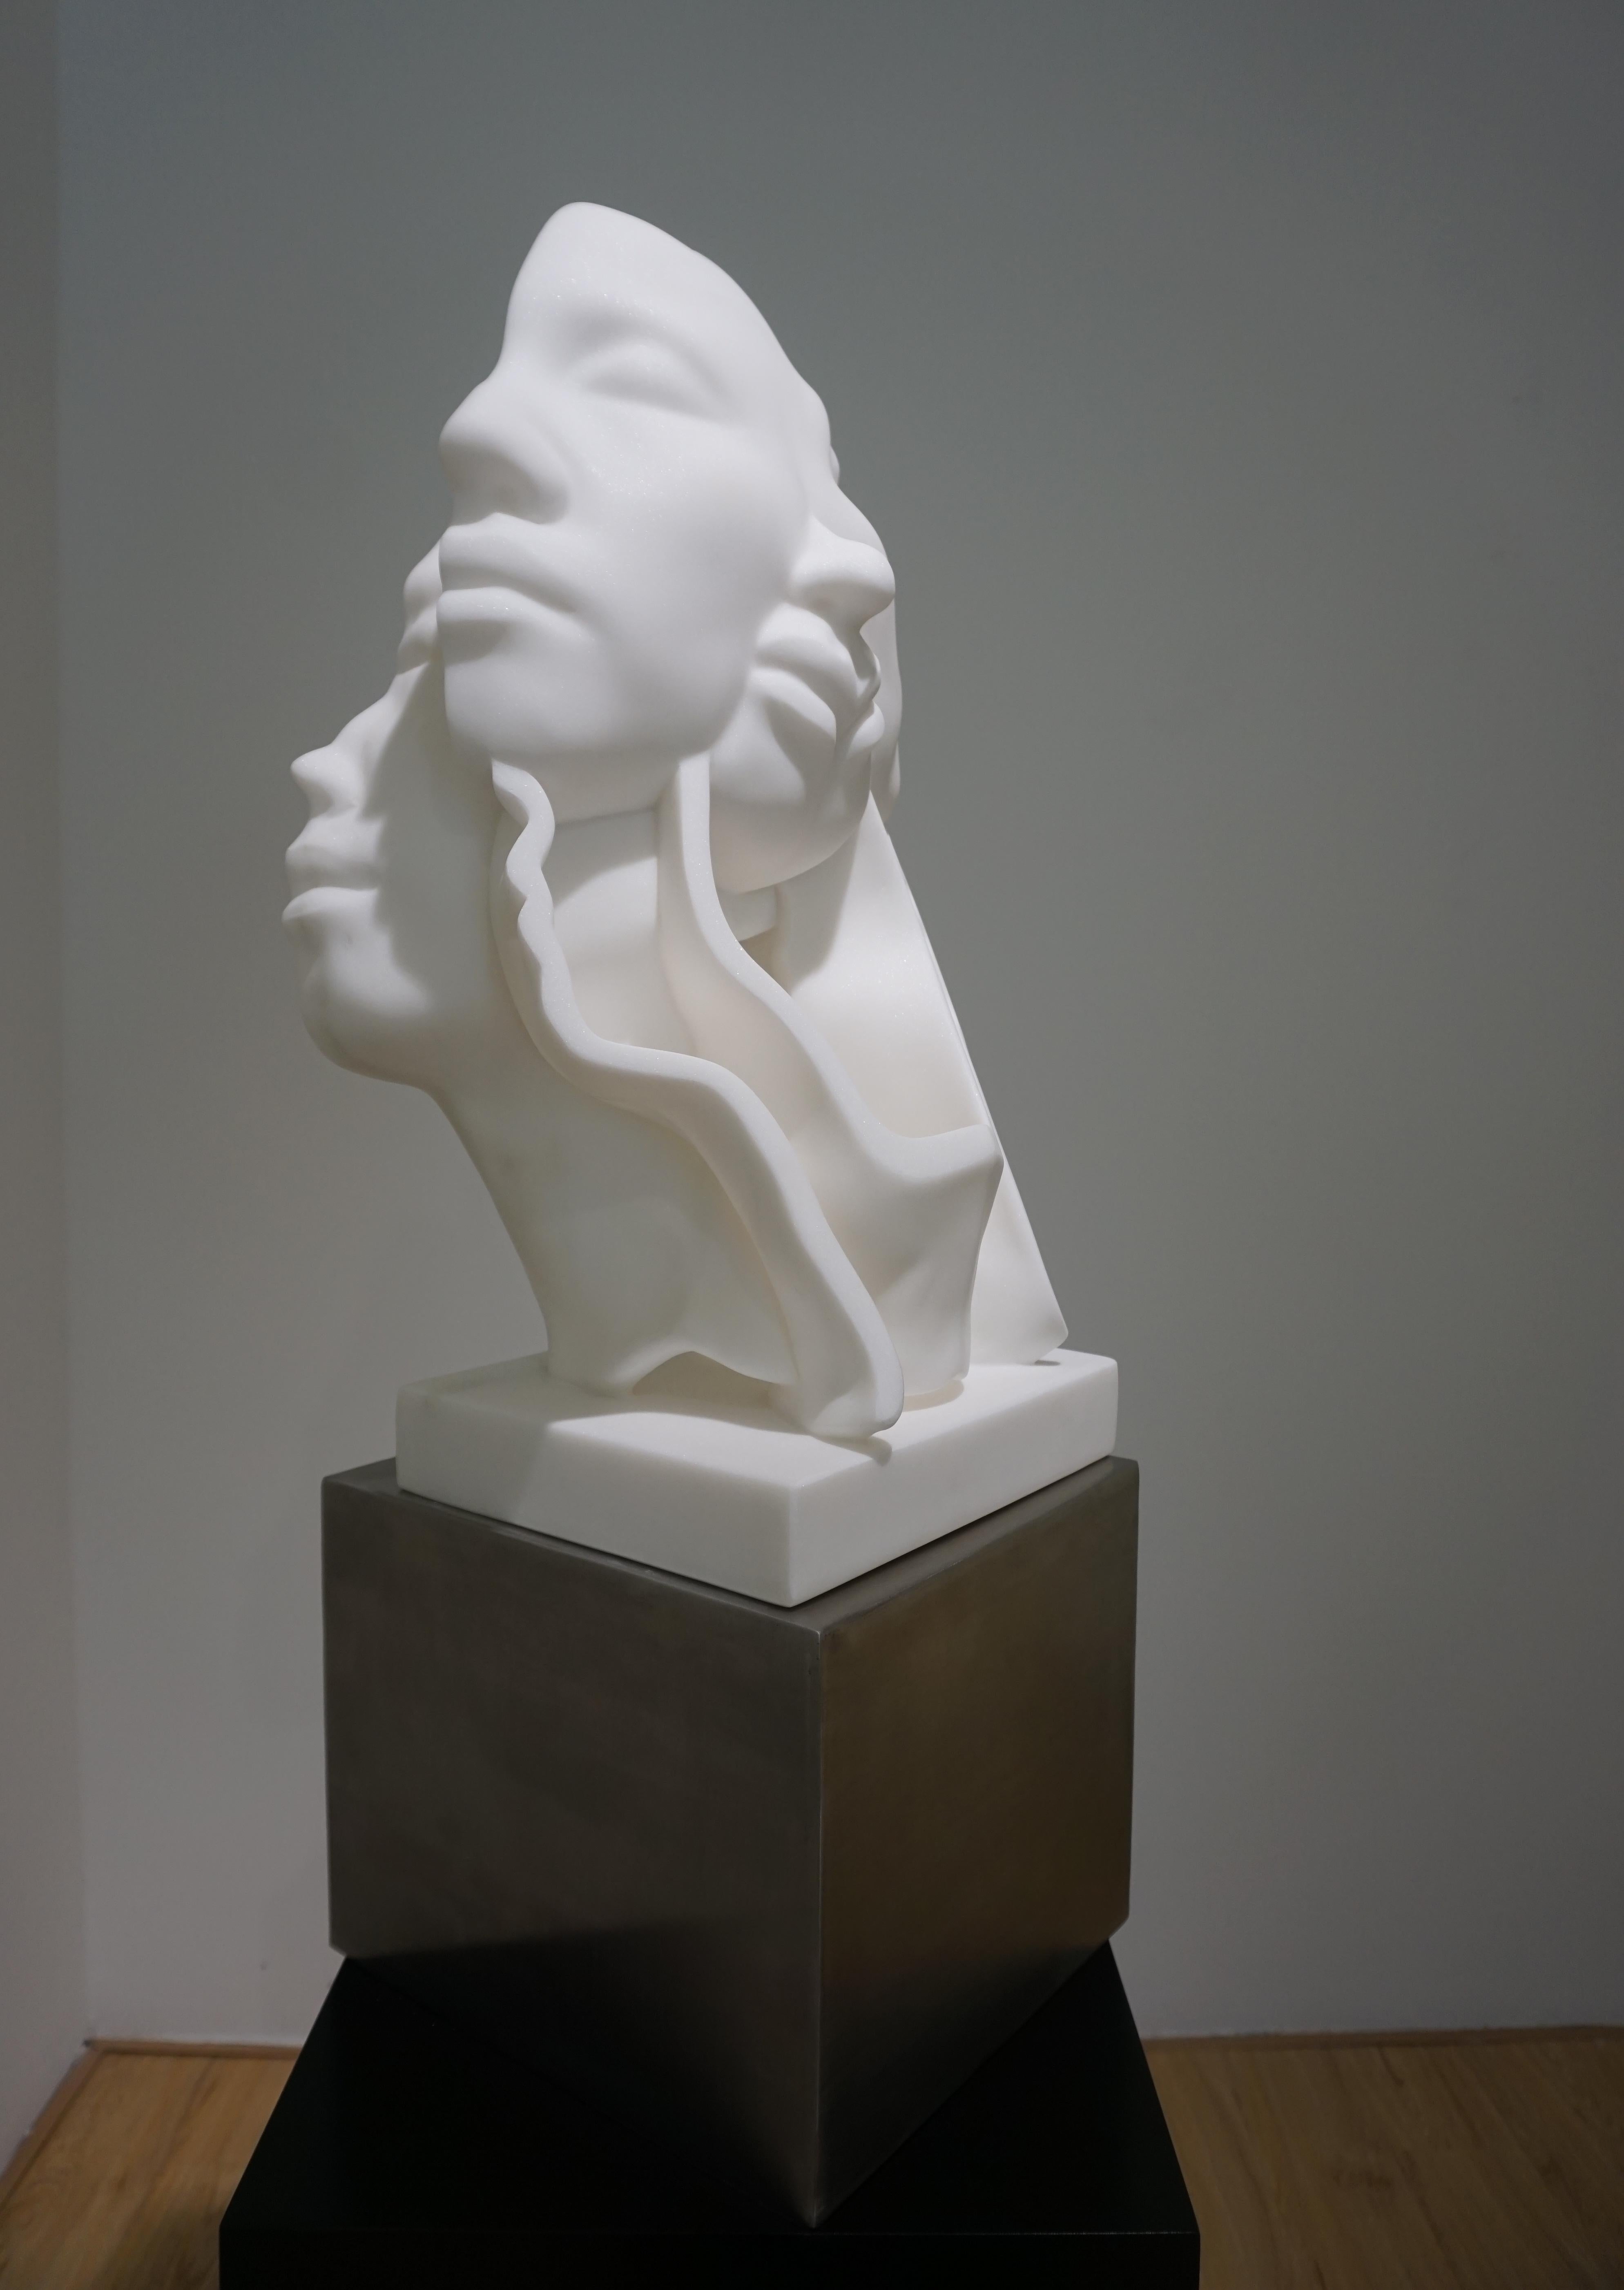 Hsu Yun Chin Abstract Sculpture - White Marble＆Stainless base Sculpture "Faces No1", 2019